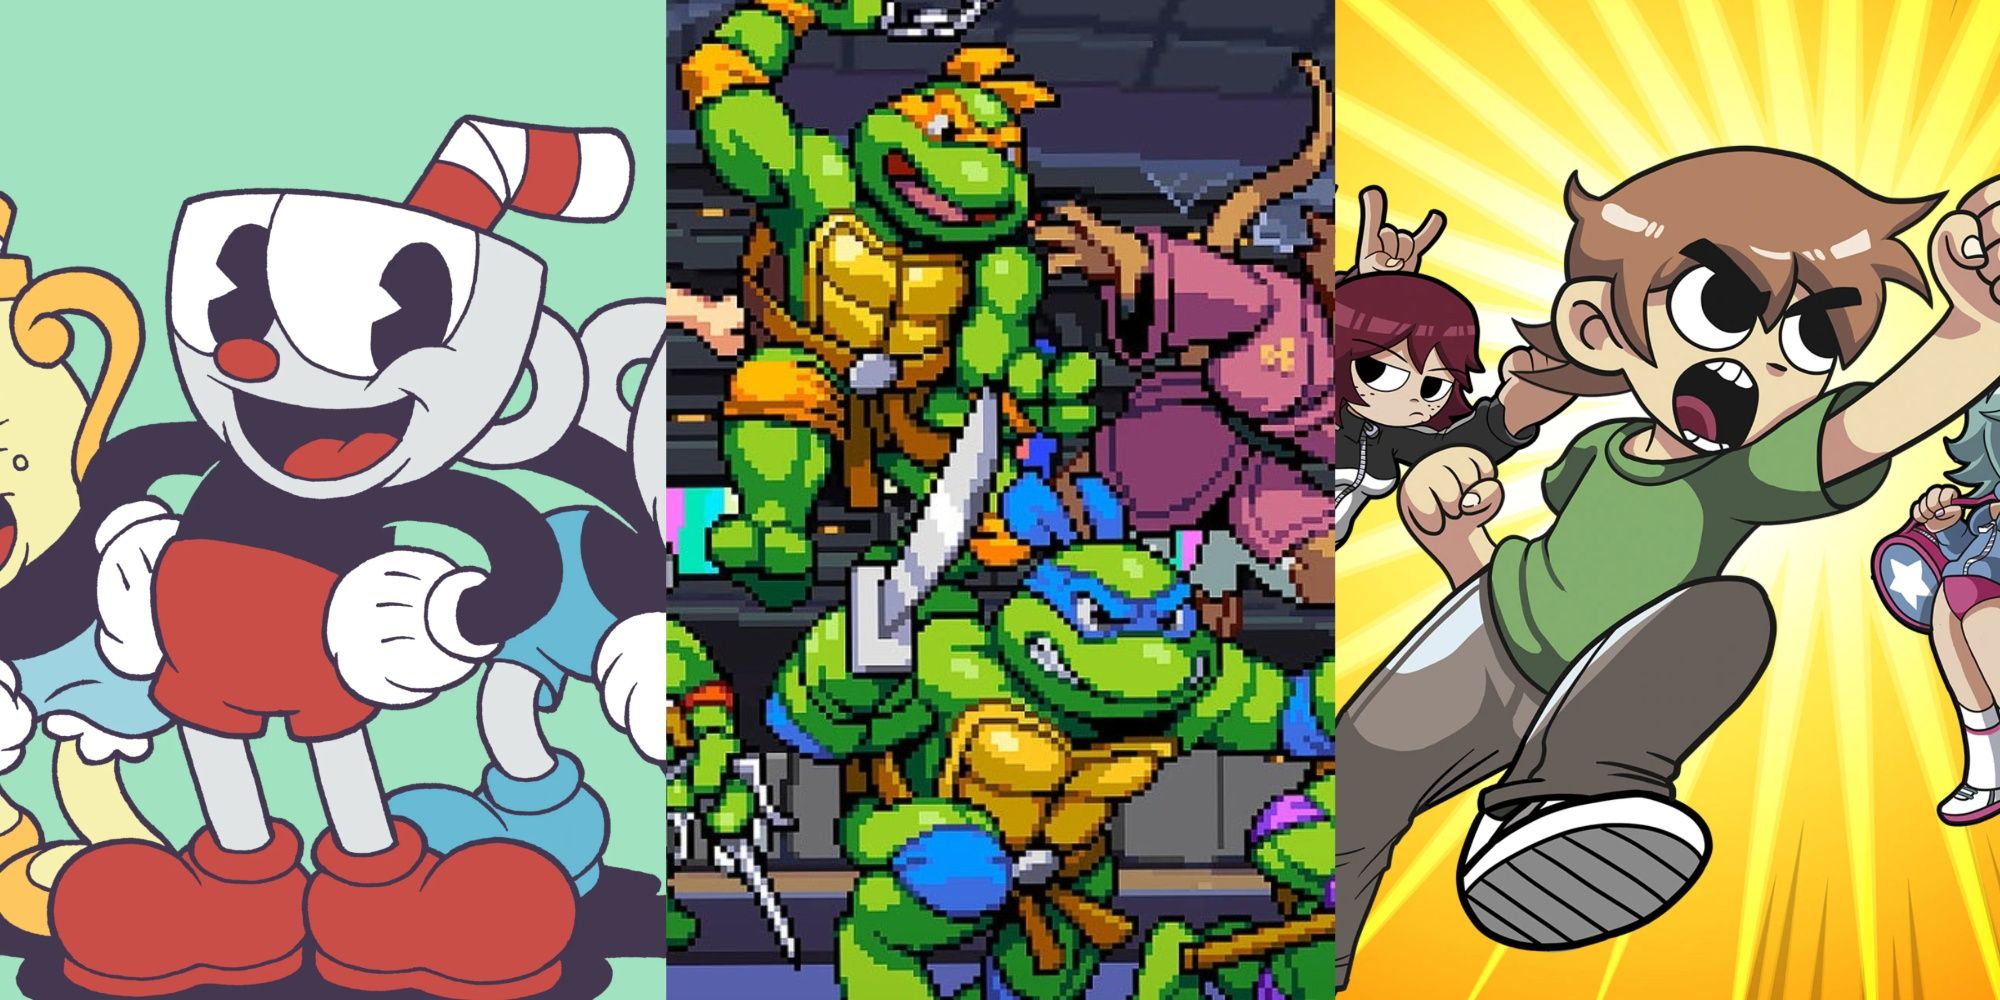 A collage showing Cuphead, TMNT, and Scott Pilgrim.